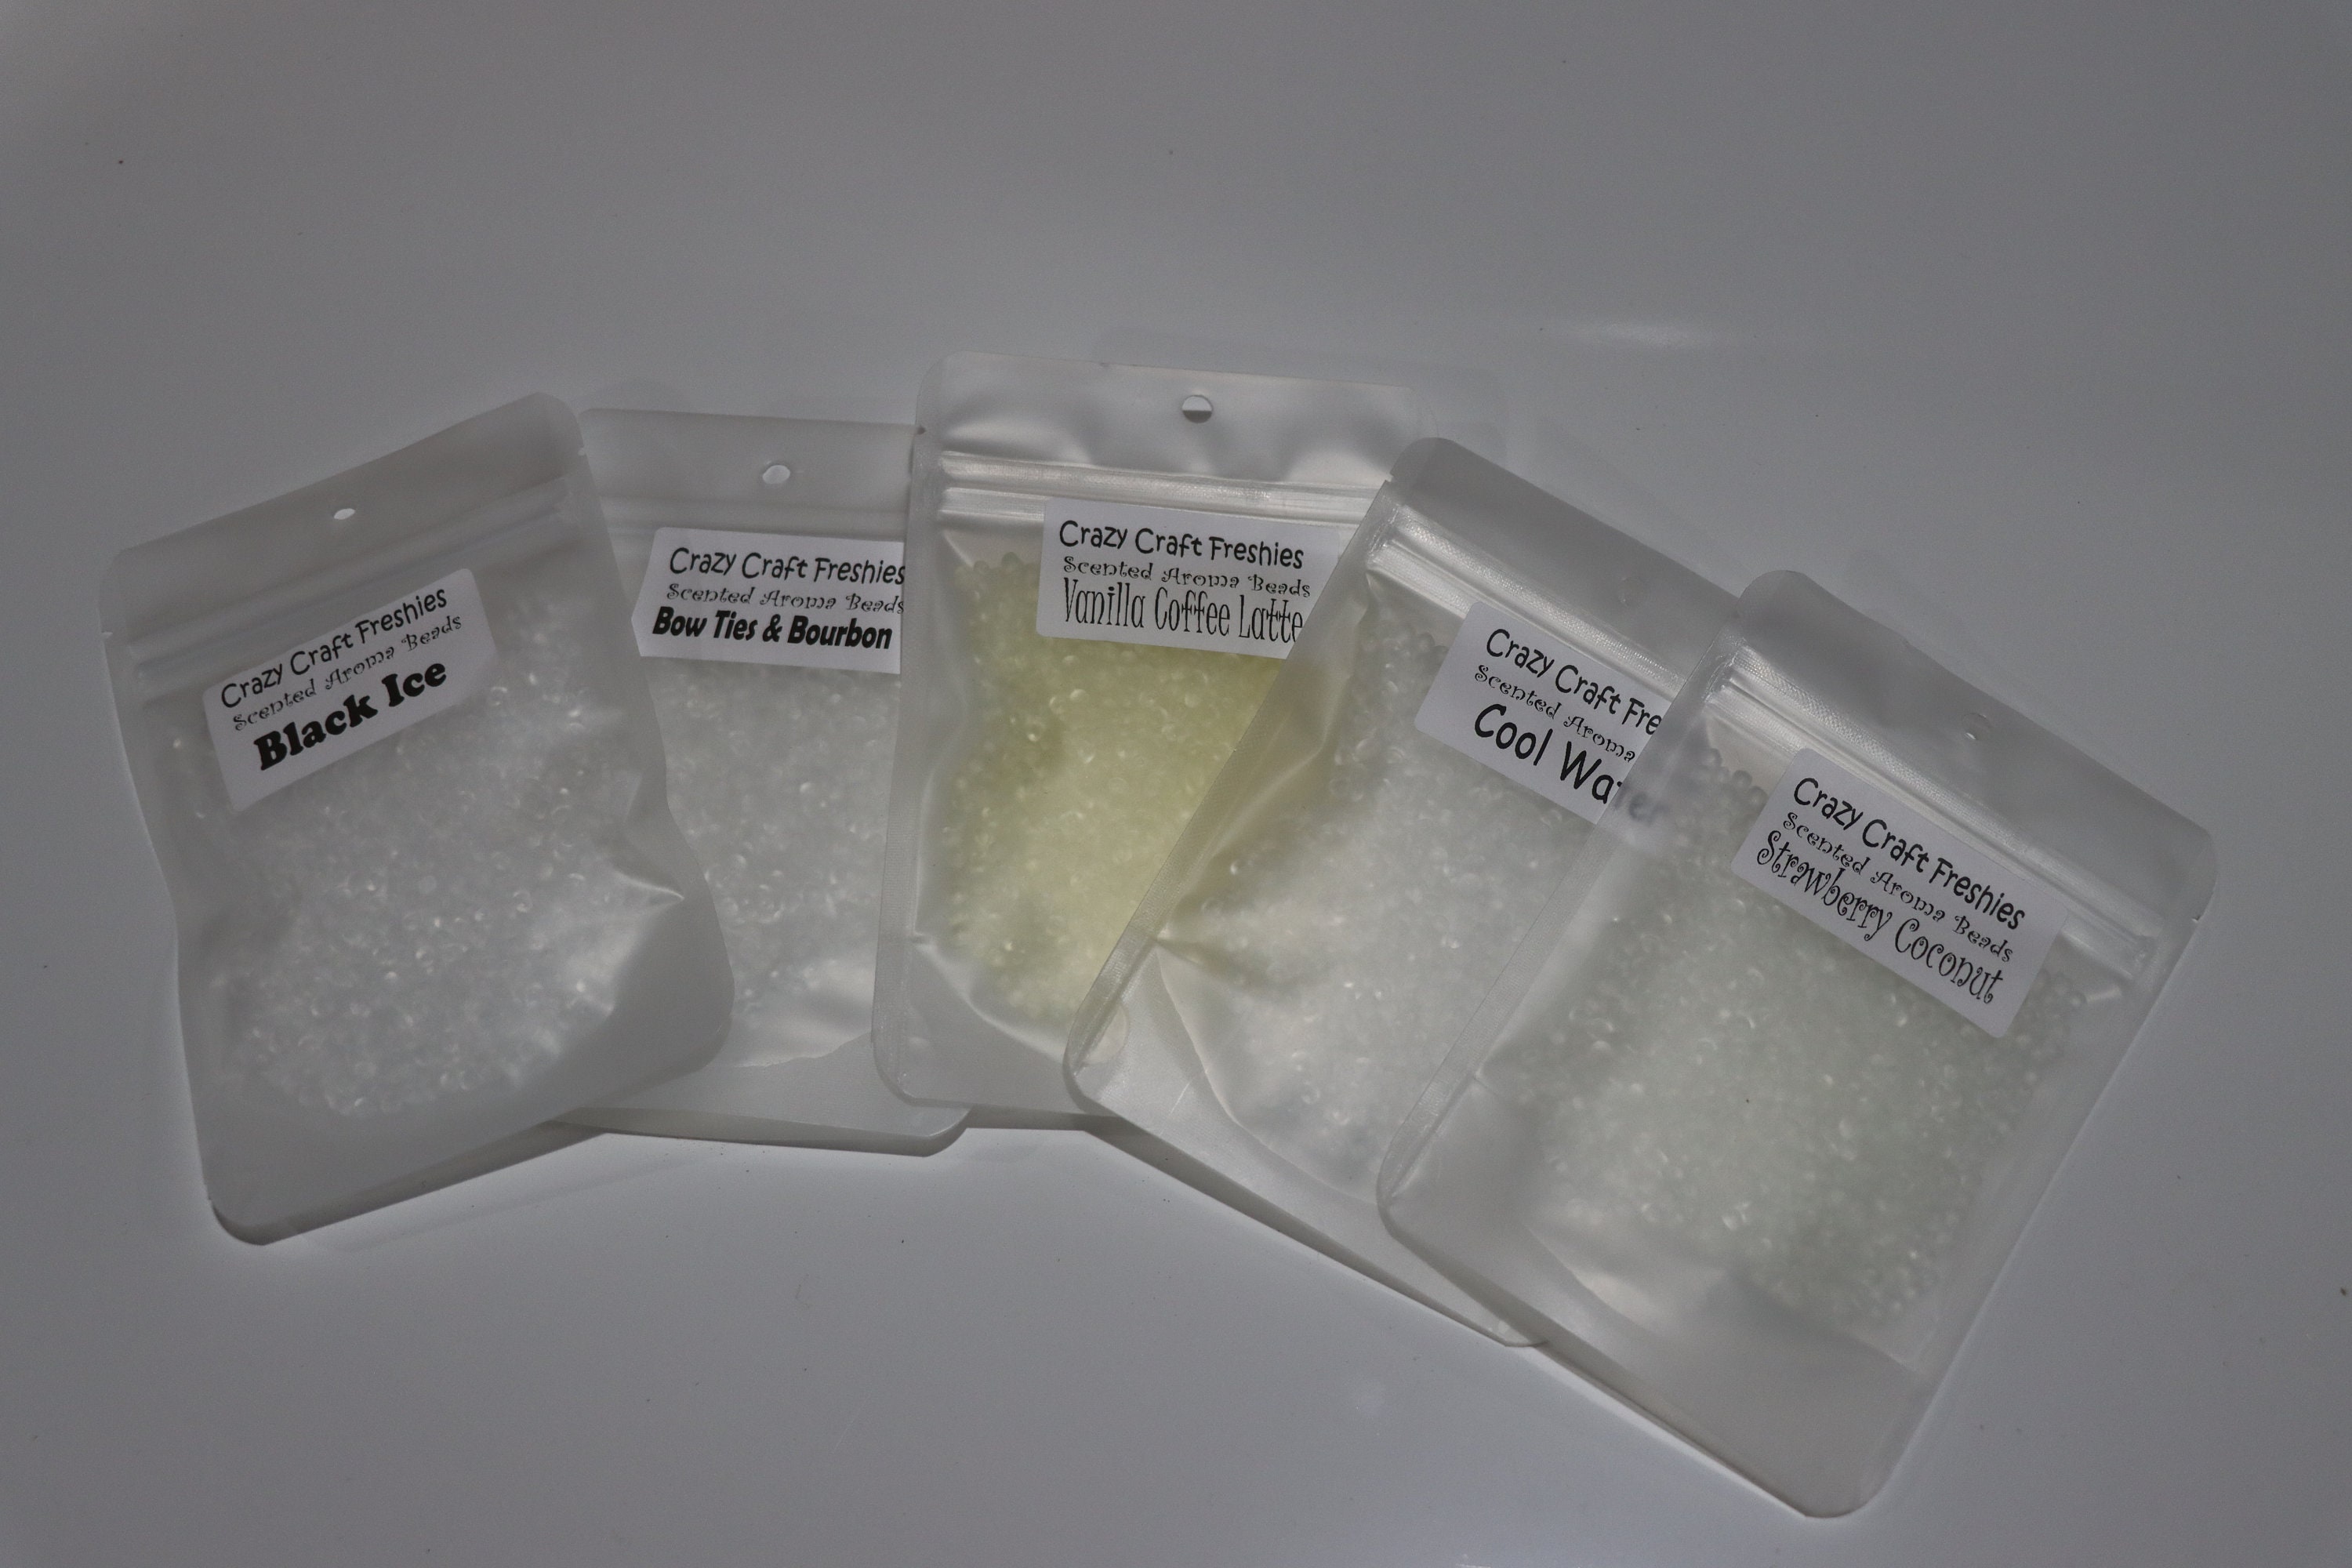 Baby Powder Scented Aroma Beads